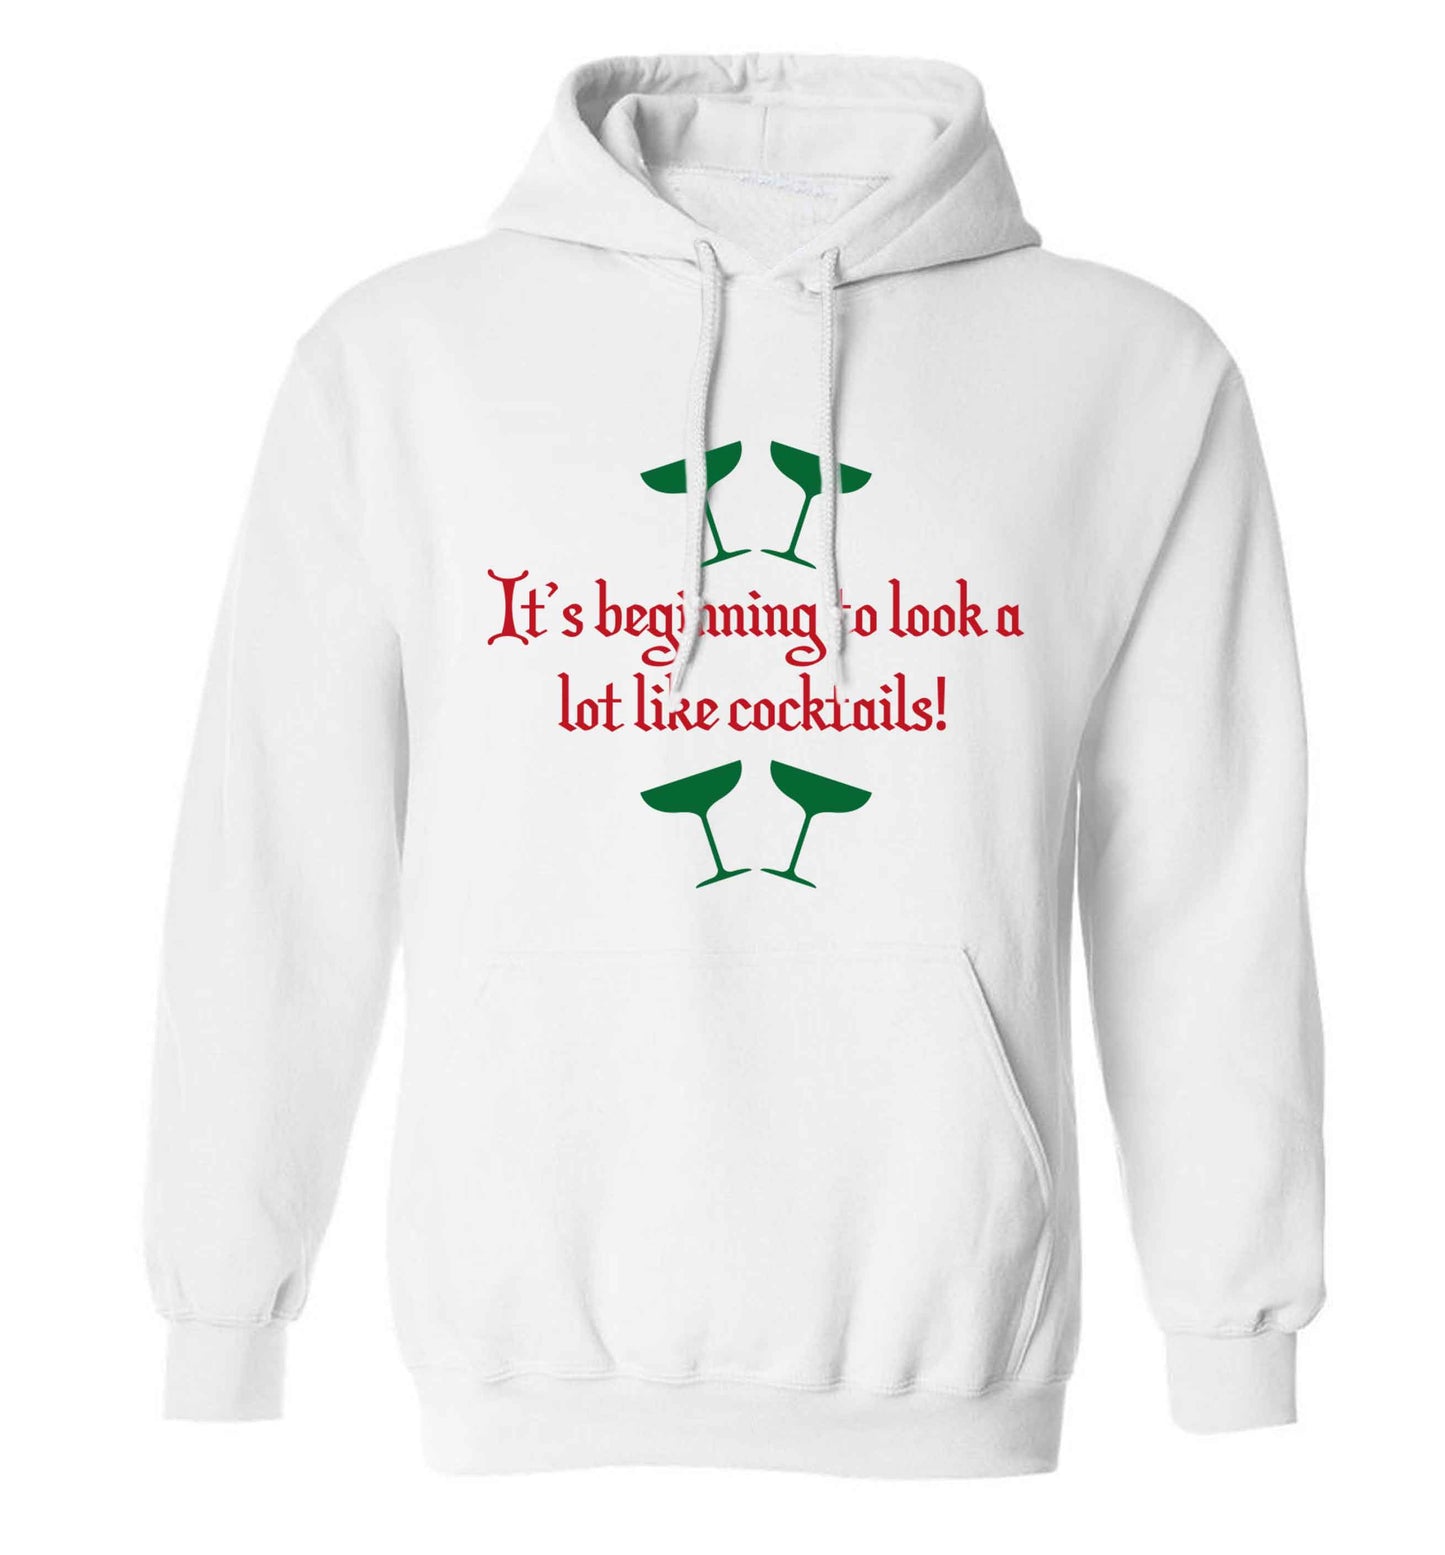 It's beginning to look a lot like cocktails adults unisex white hoodie 2XL